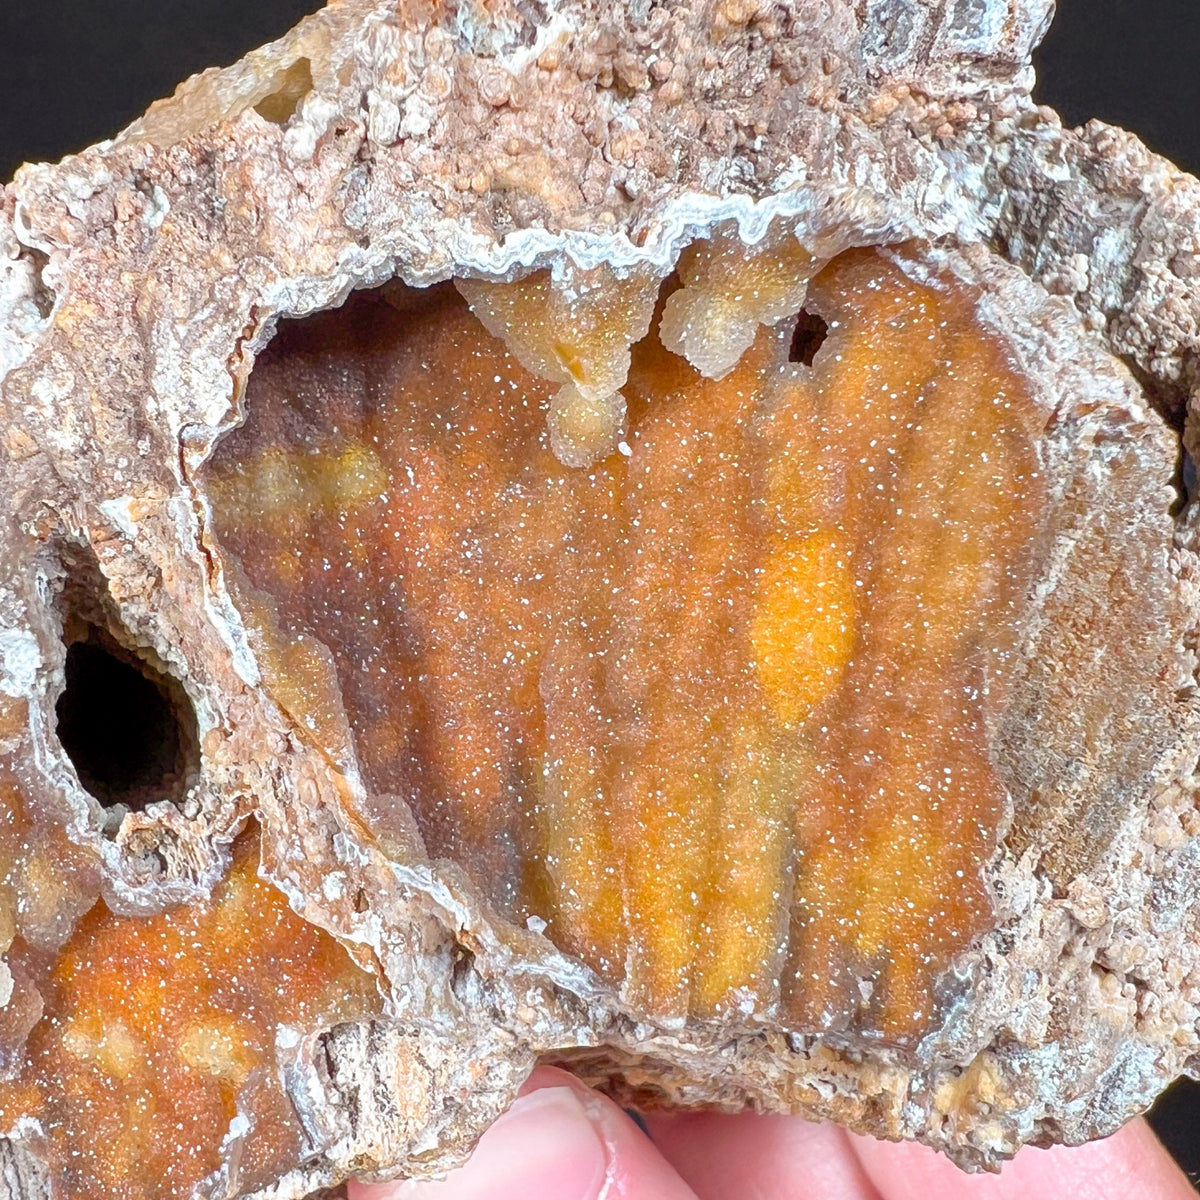 Drusy Quartz Crystals Inside Fossilized Coral from Florida